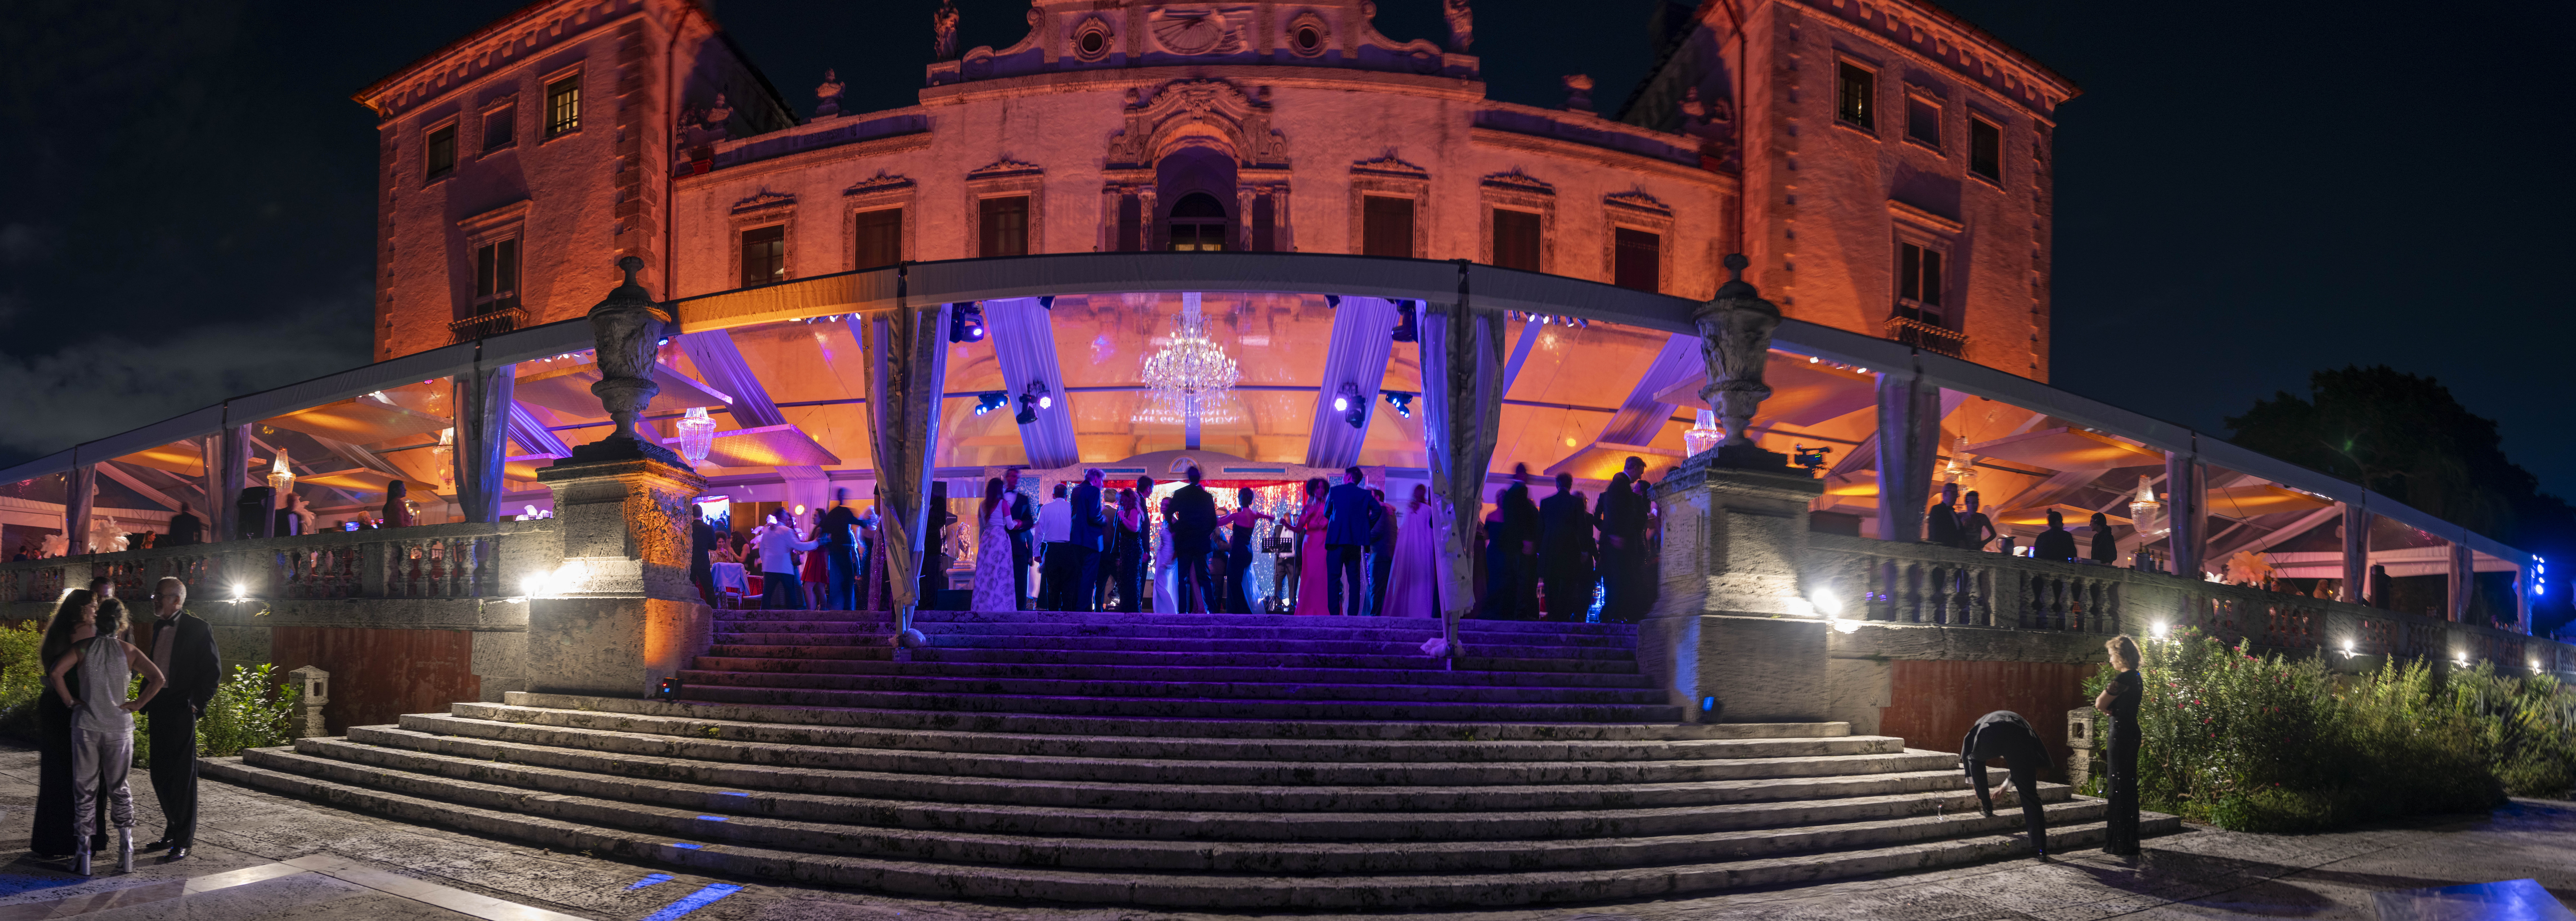 A grandiose Vizcaya Ball in full swing, hosted within a large building illuminated at night, captivating guests on the steps.